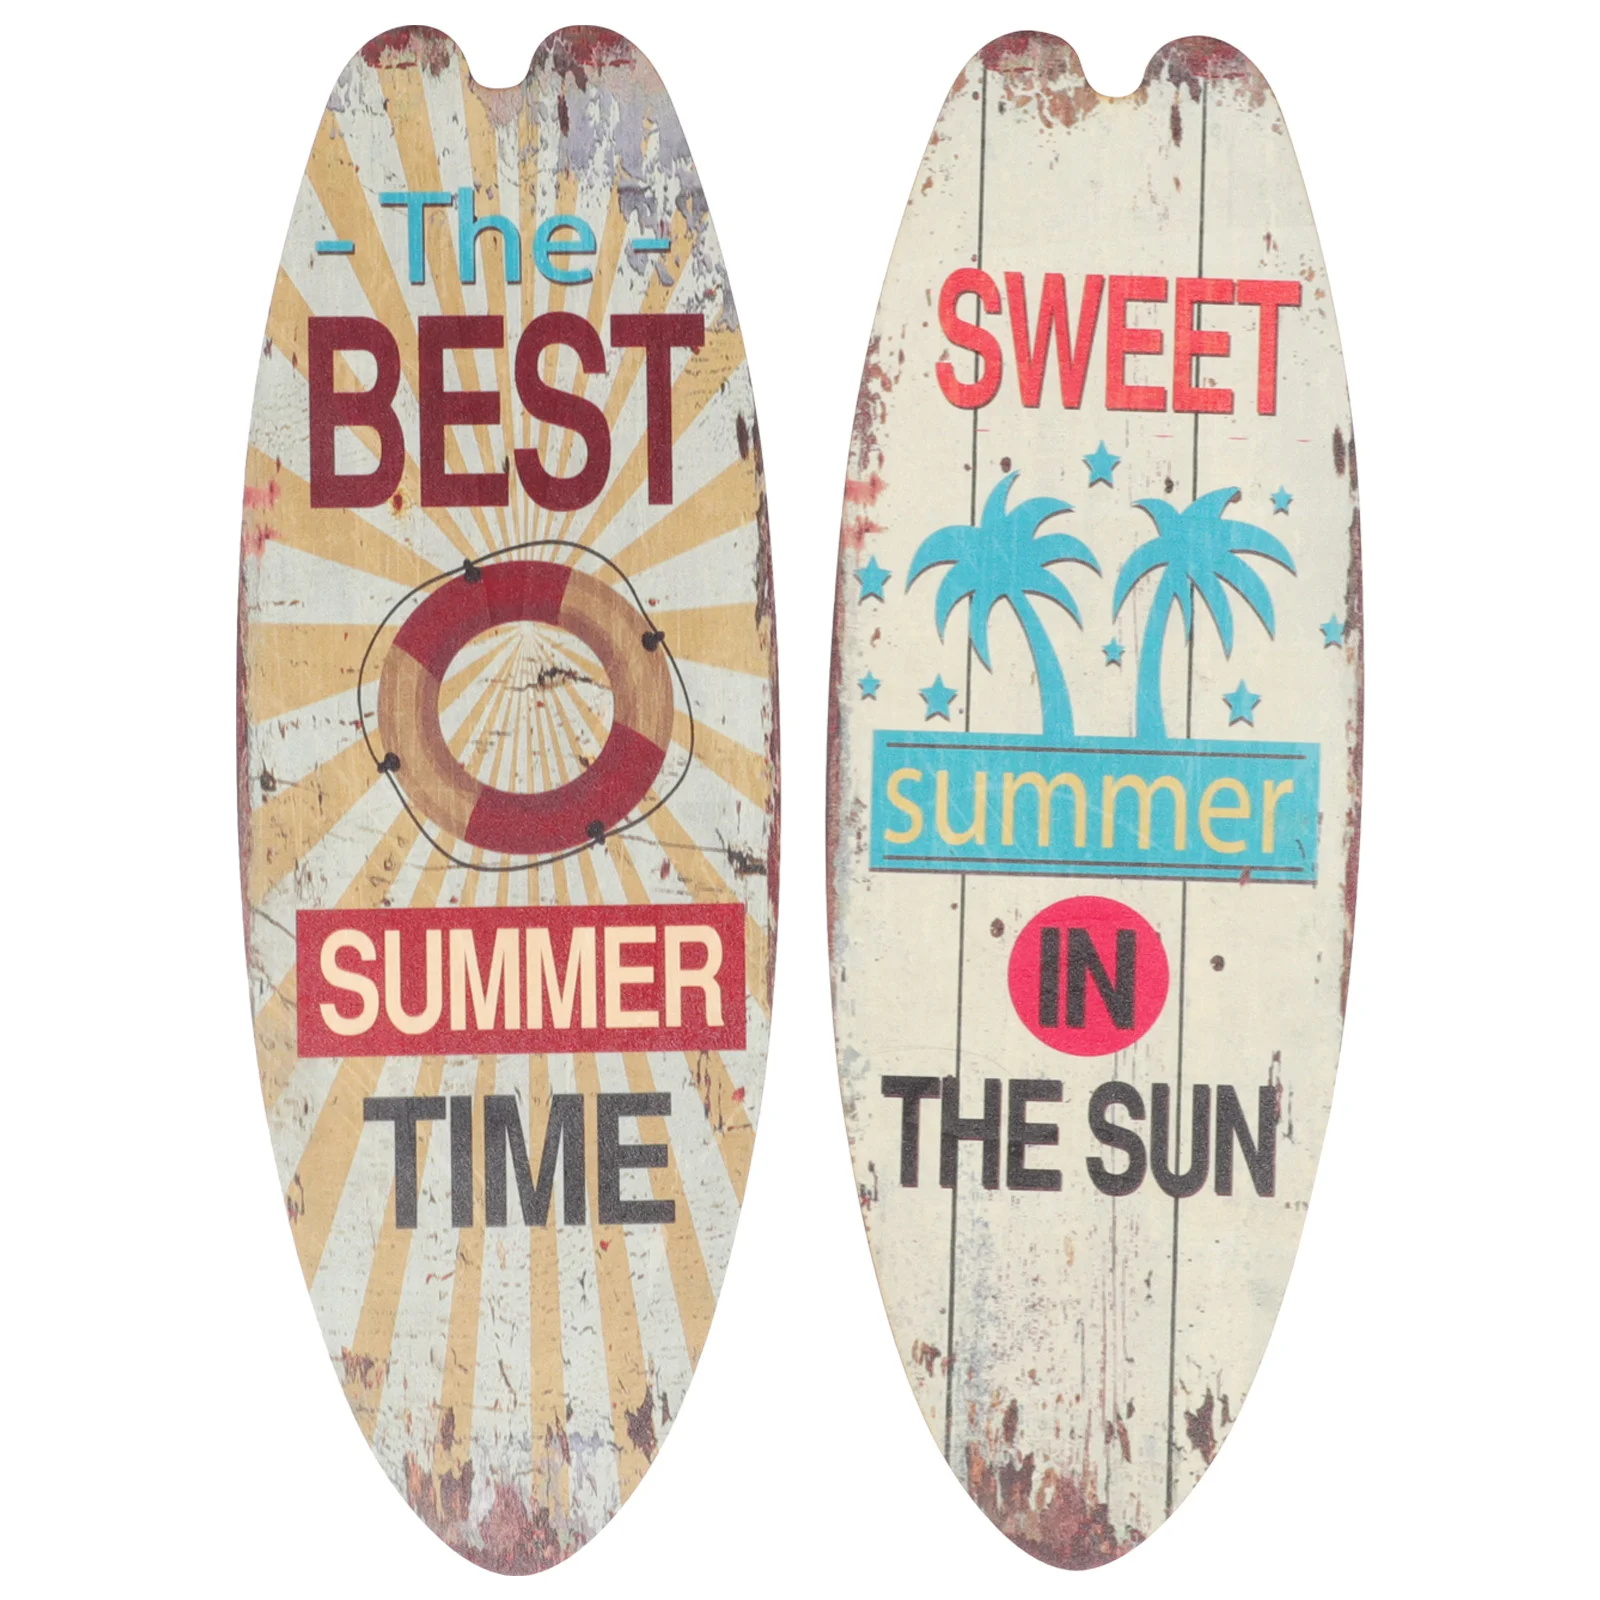 

Hanging Plaque Beach Necessities Vacation Wooden Surfboard Sign Decorative Wall Ornament Indoor Decoration Vintage Posters